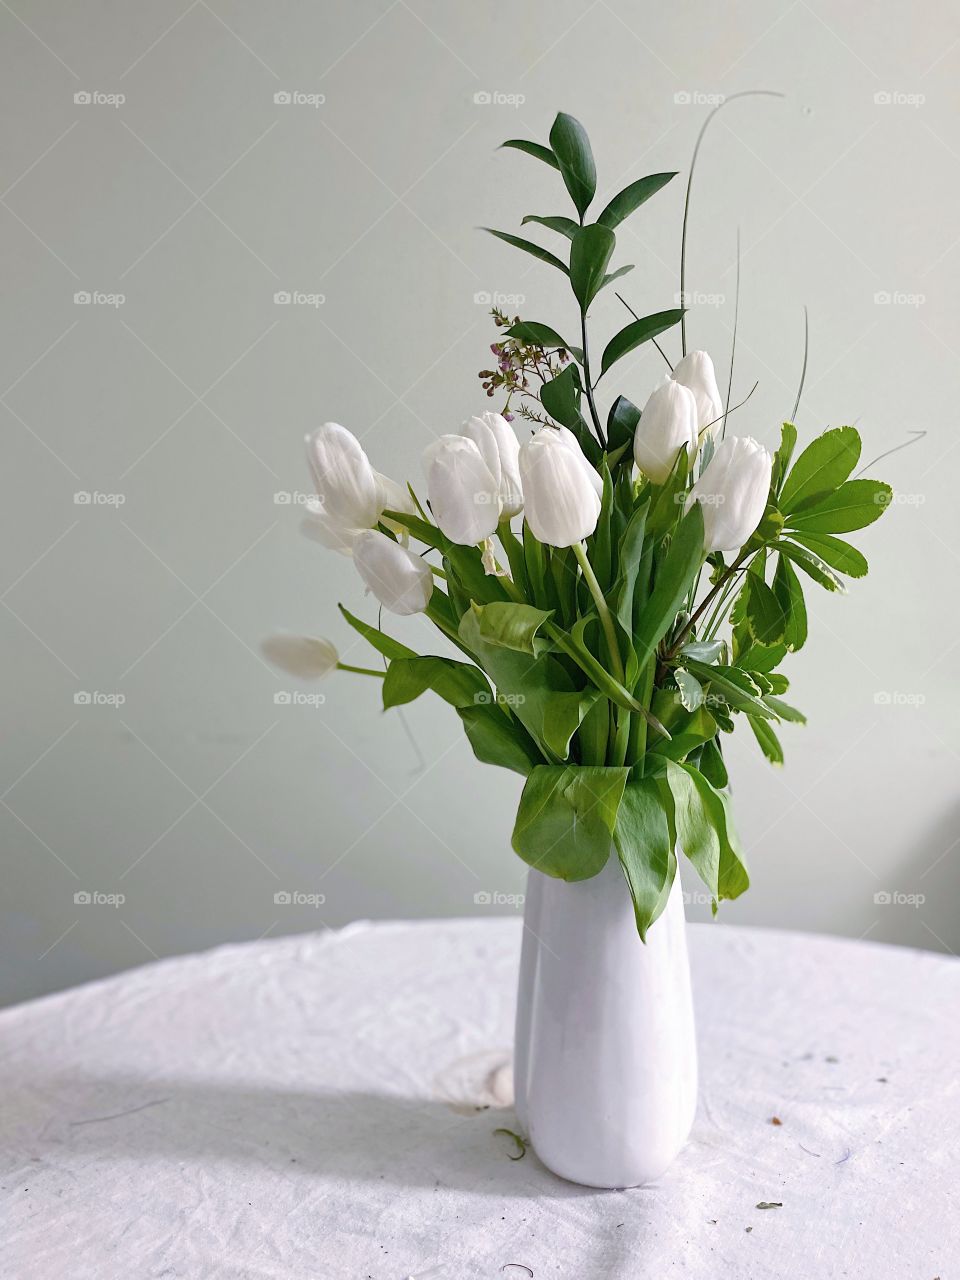 A white vase with white tulips and greenery atop a white linen table cloth.